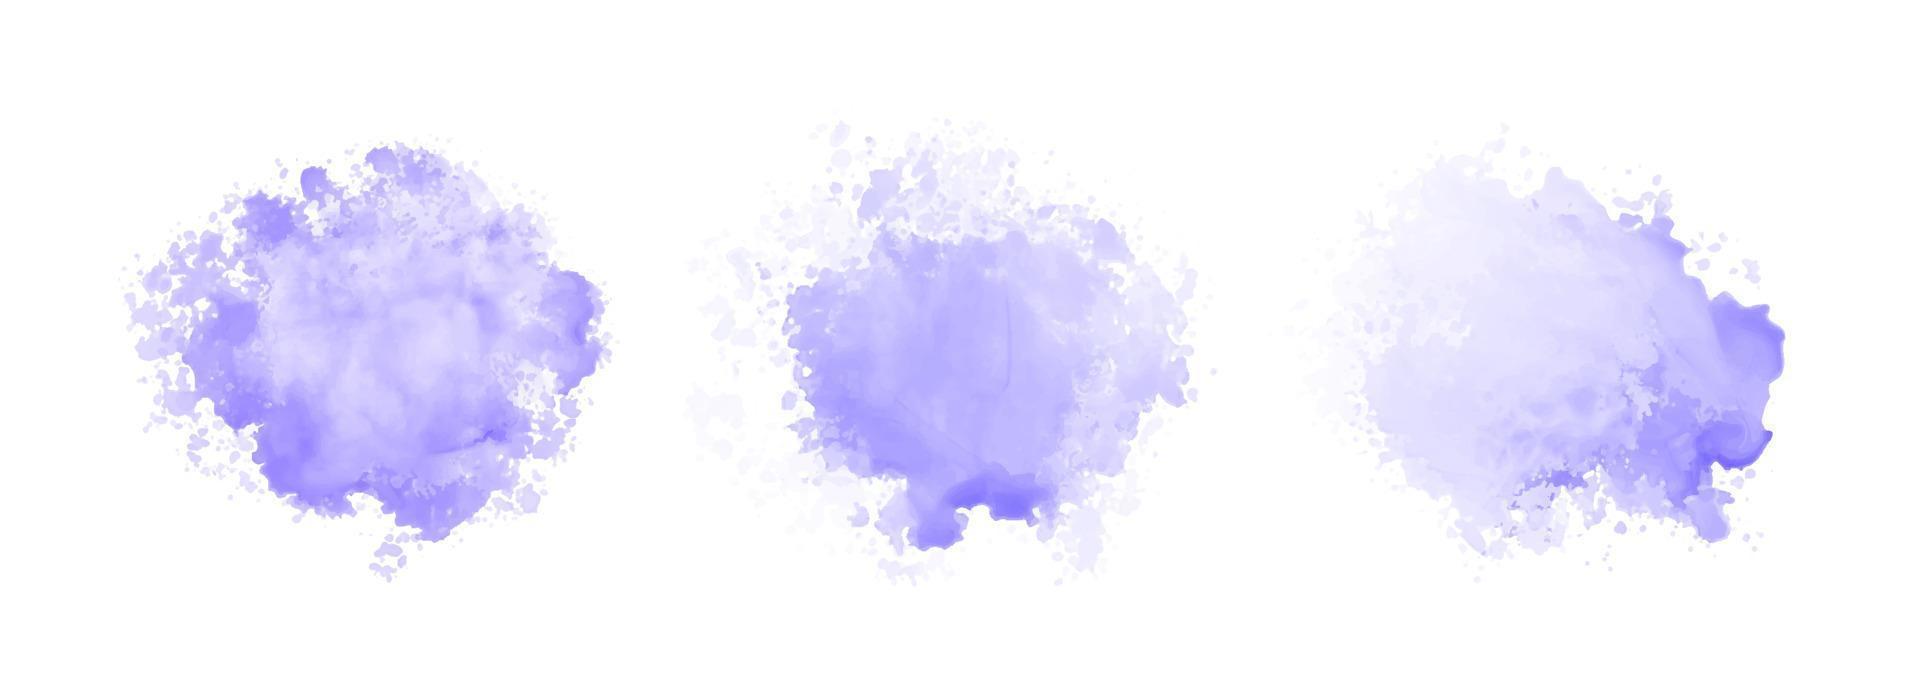 Set of abstract purple watercolor water splash on a white background vector